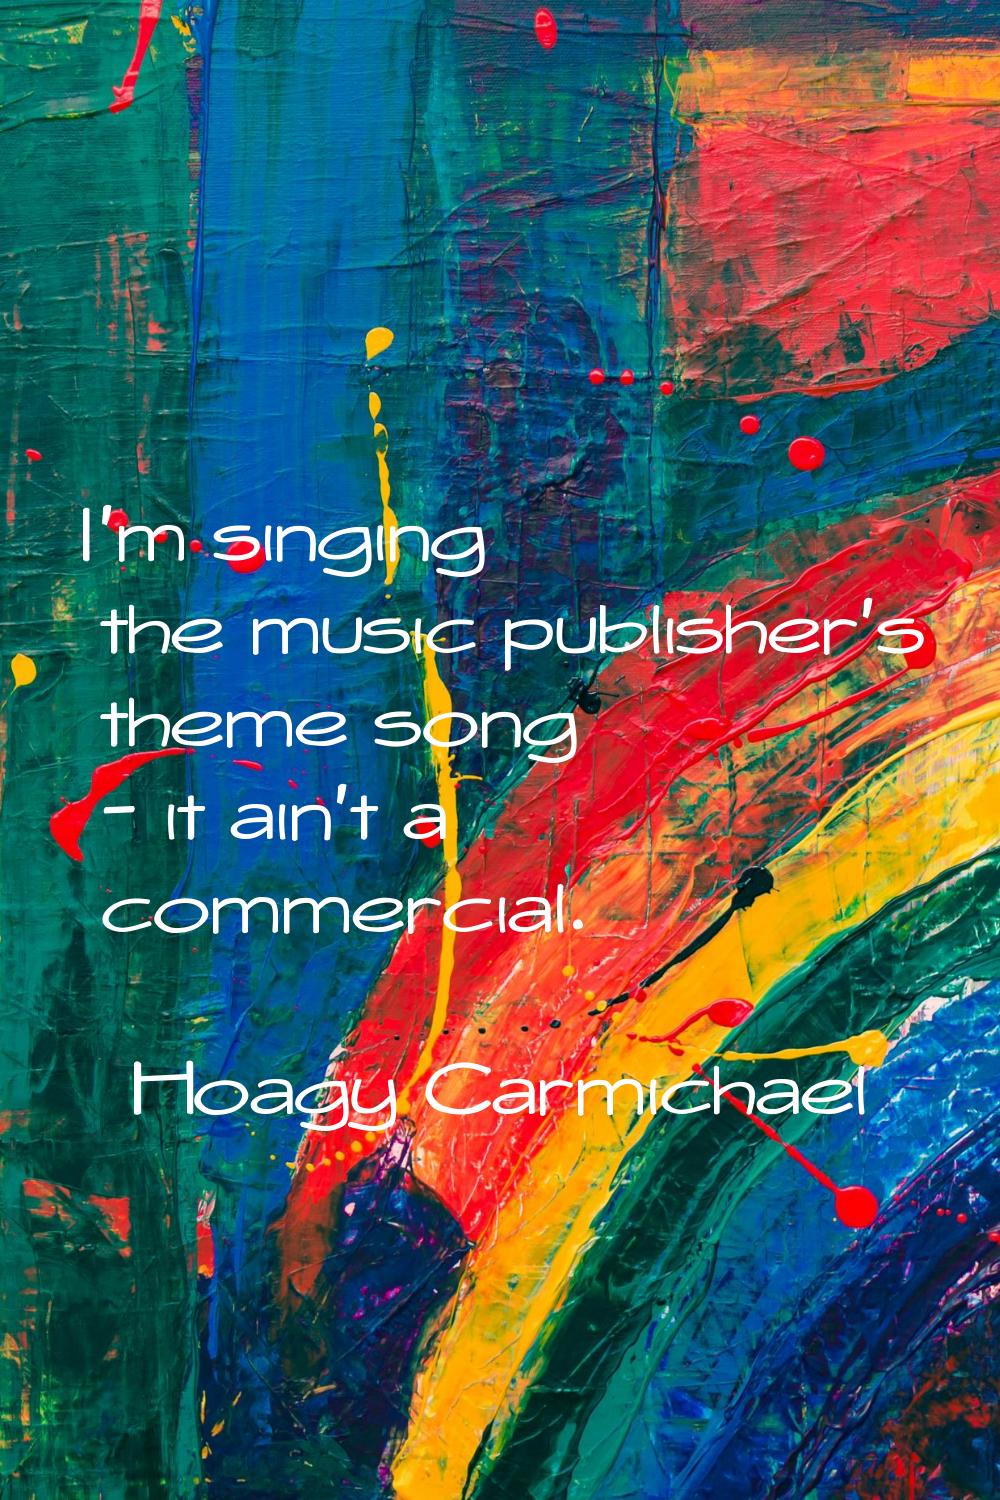 I'm singing the music publisher's theme song - it ain't a commercial.